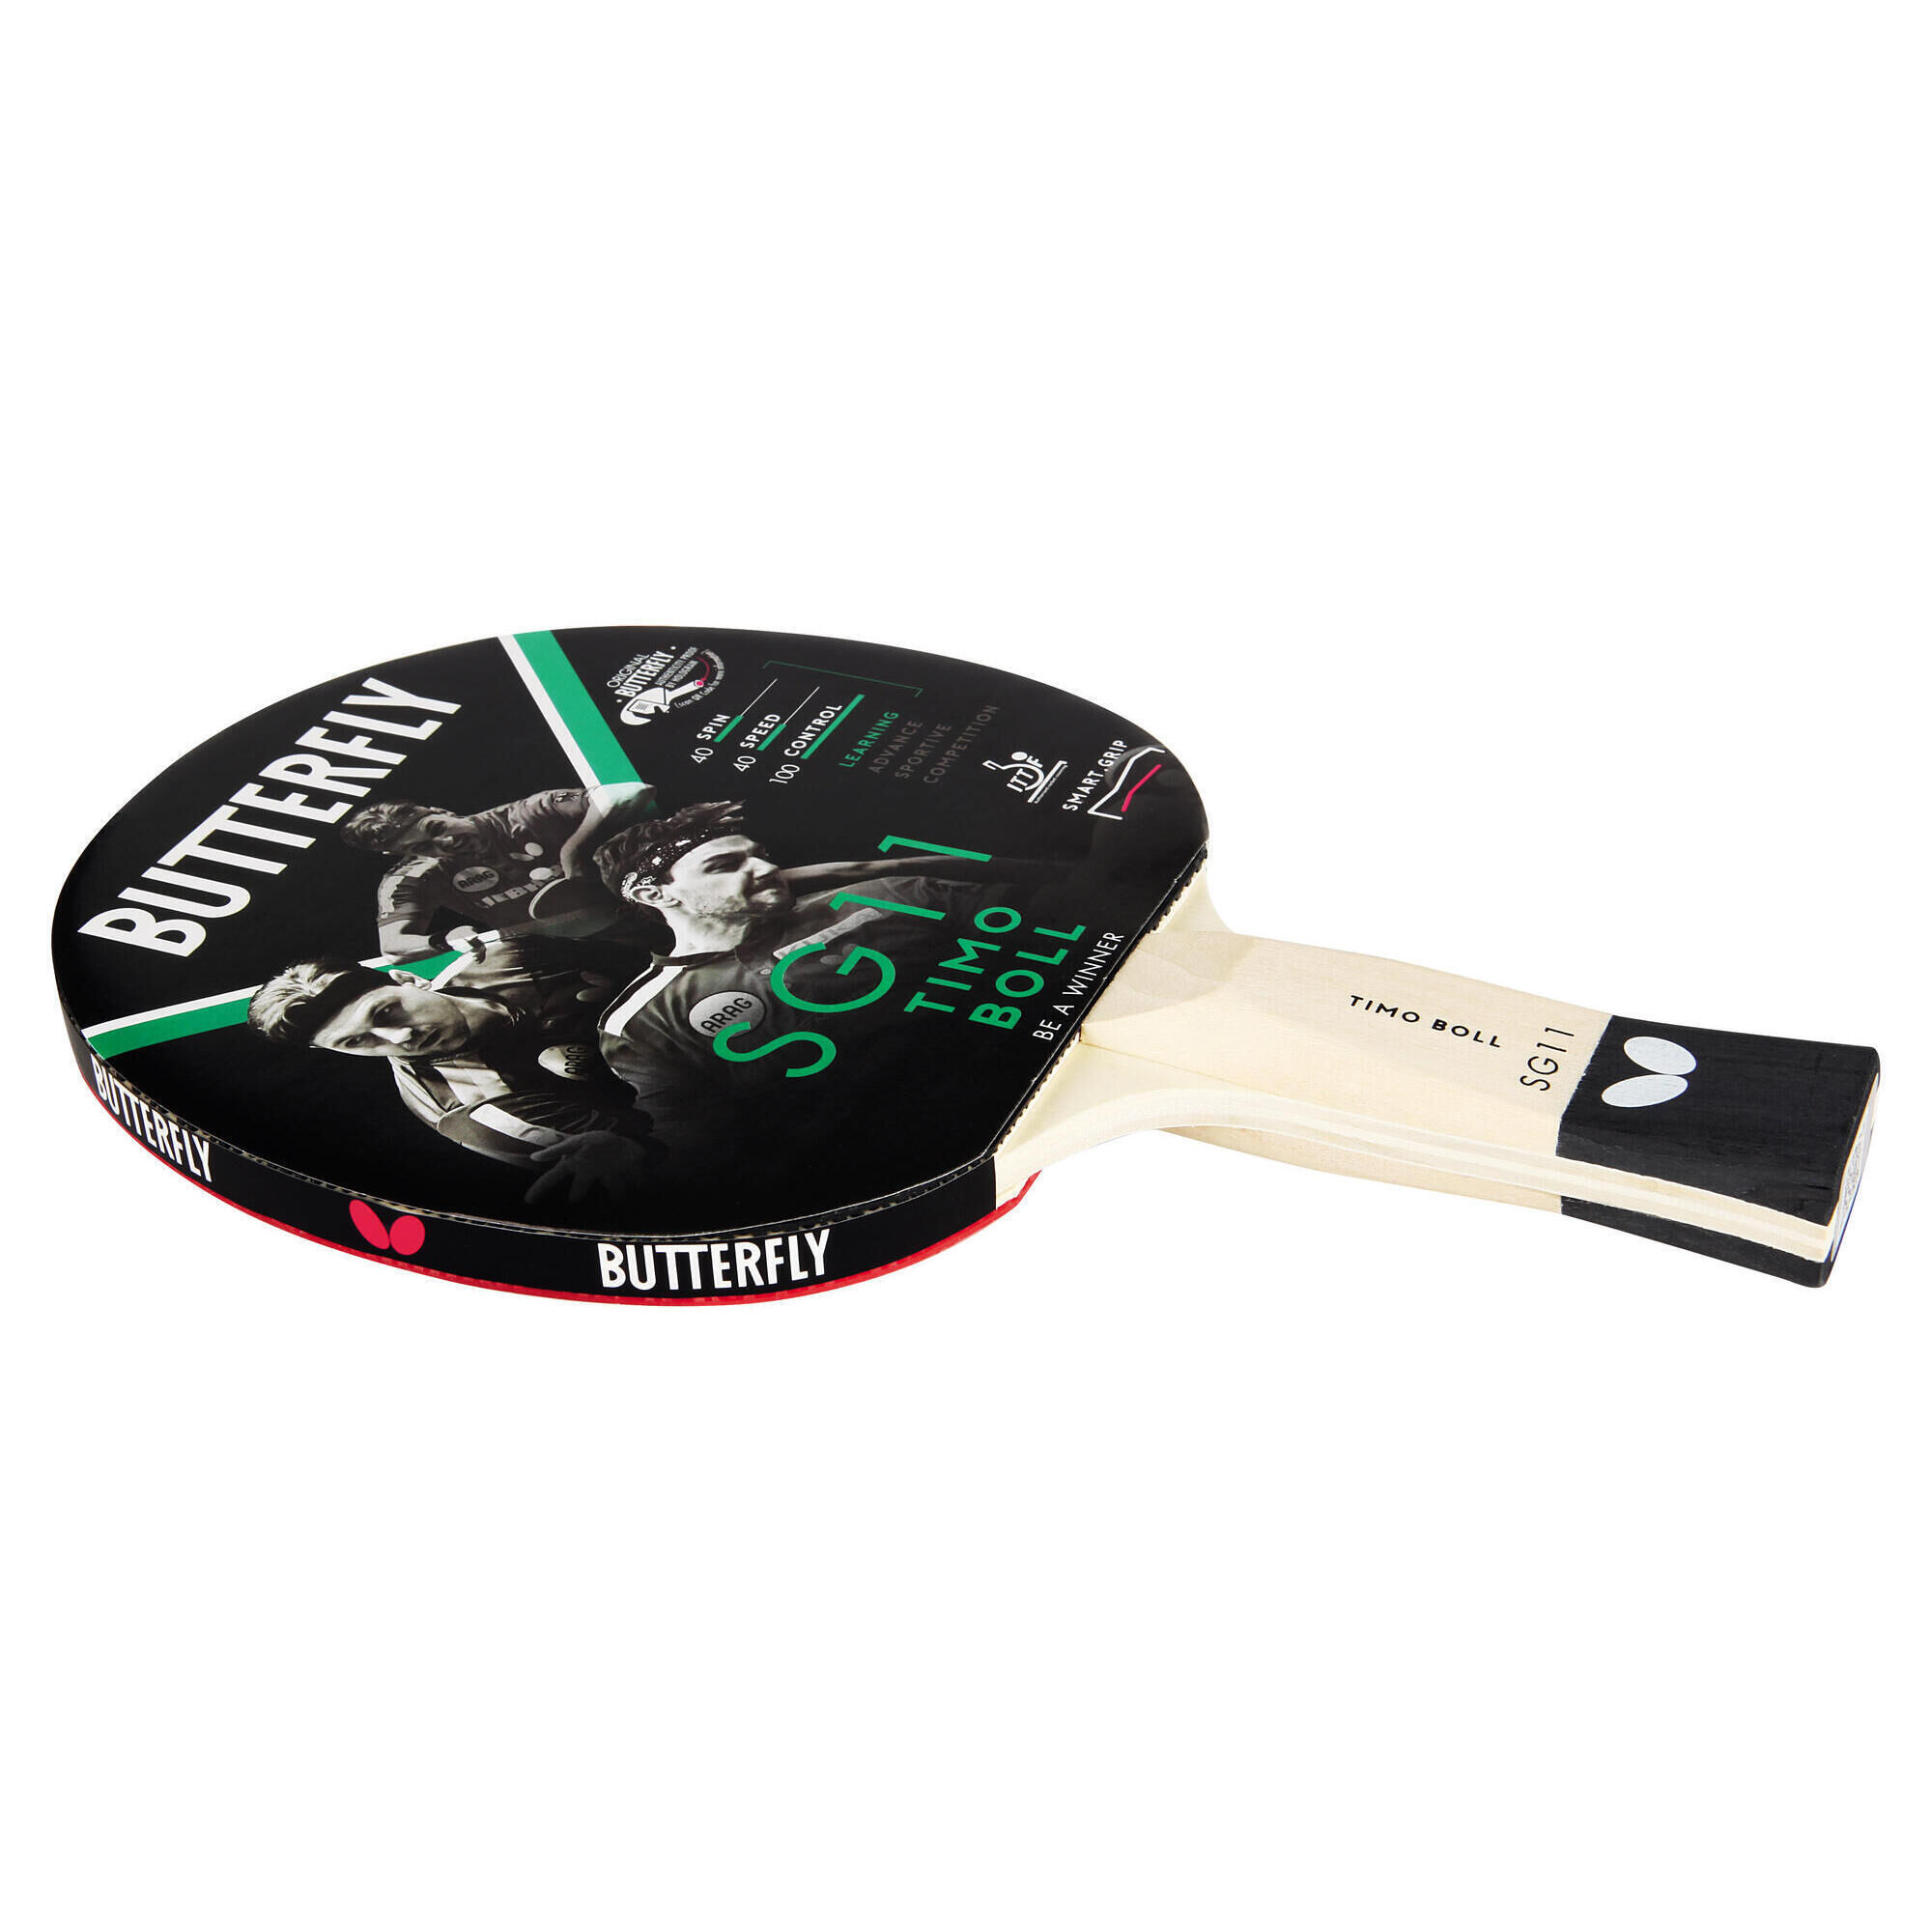 BUTTERFLY Butterfly Timo Boll SG11